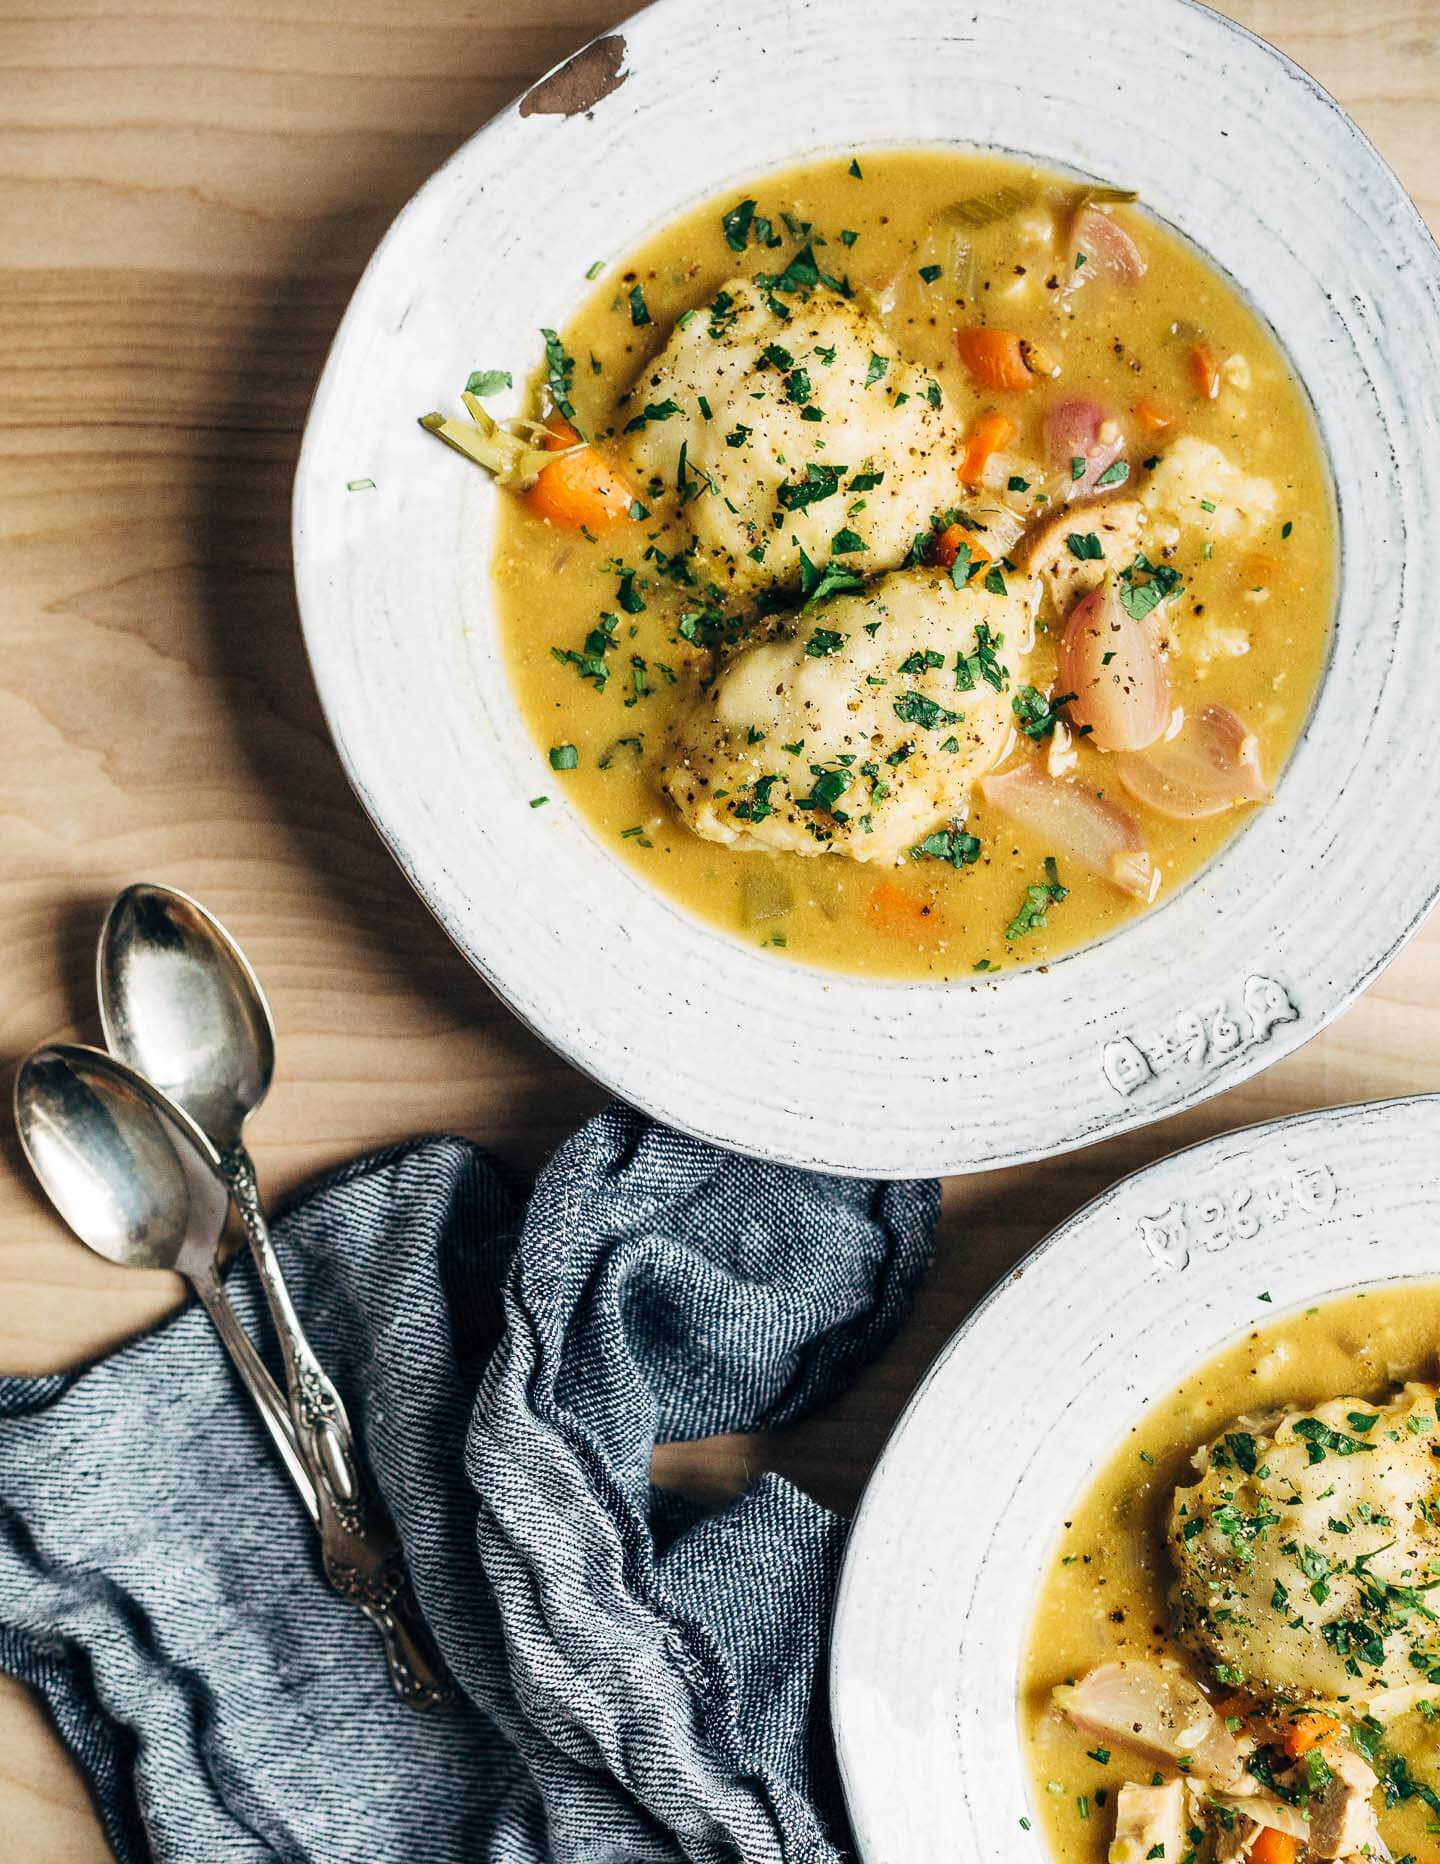 A simplified springtime spin on traditional chicken and dumpling soup made with fresh chives, young carrots, turnips, and radishes.